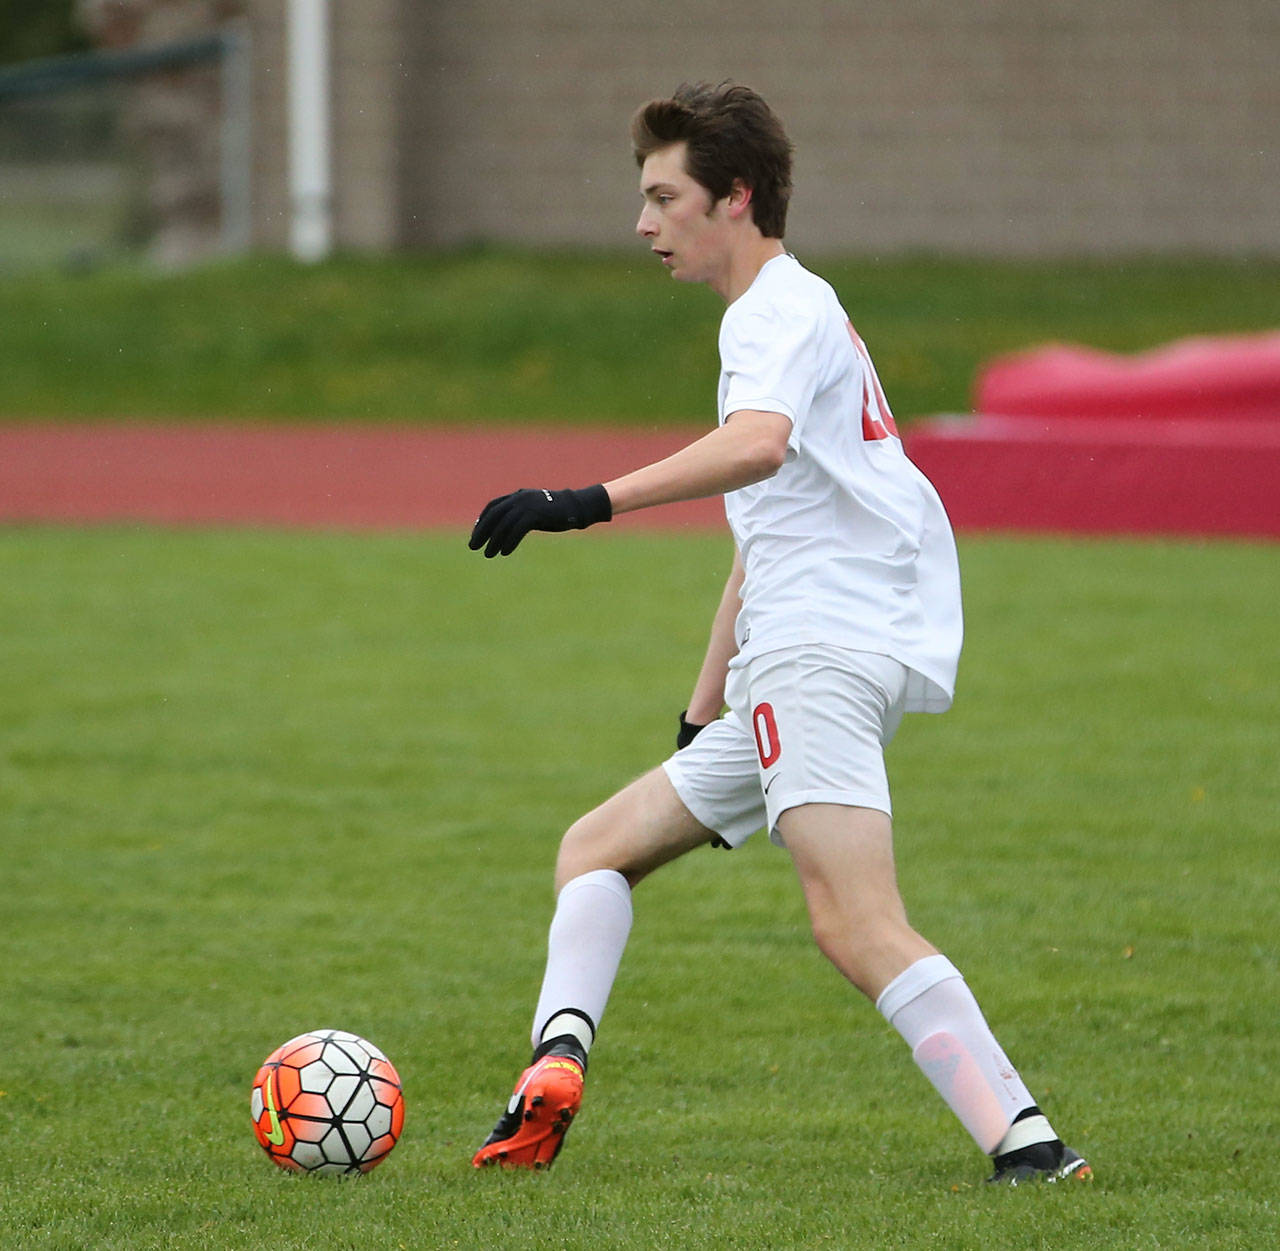 Nick Dion looks to pass for the Wolves. (Photo by John Fisken)